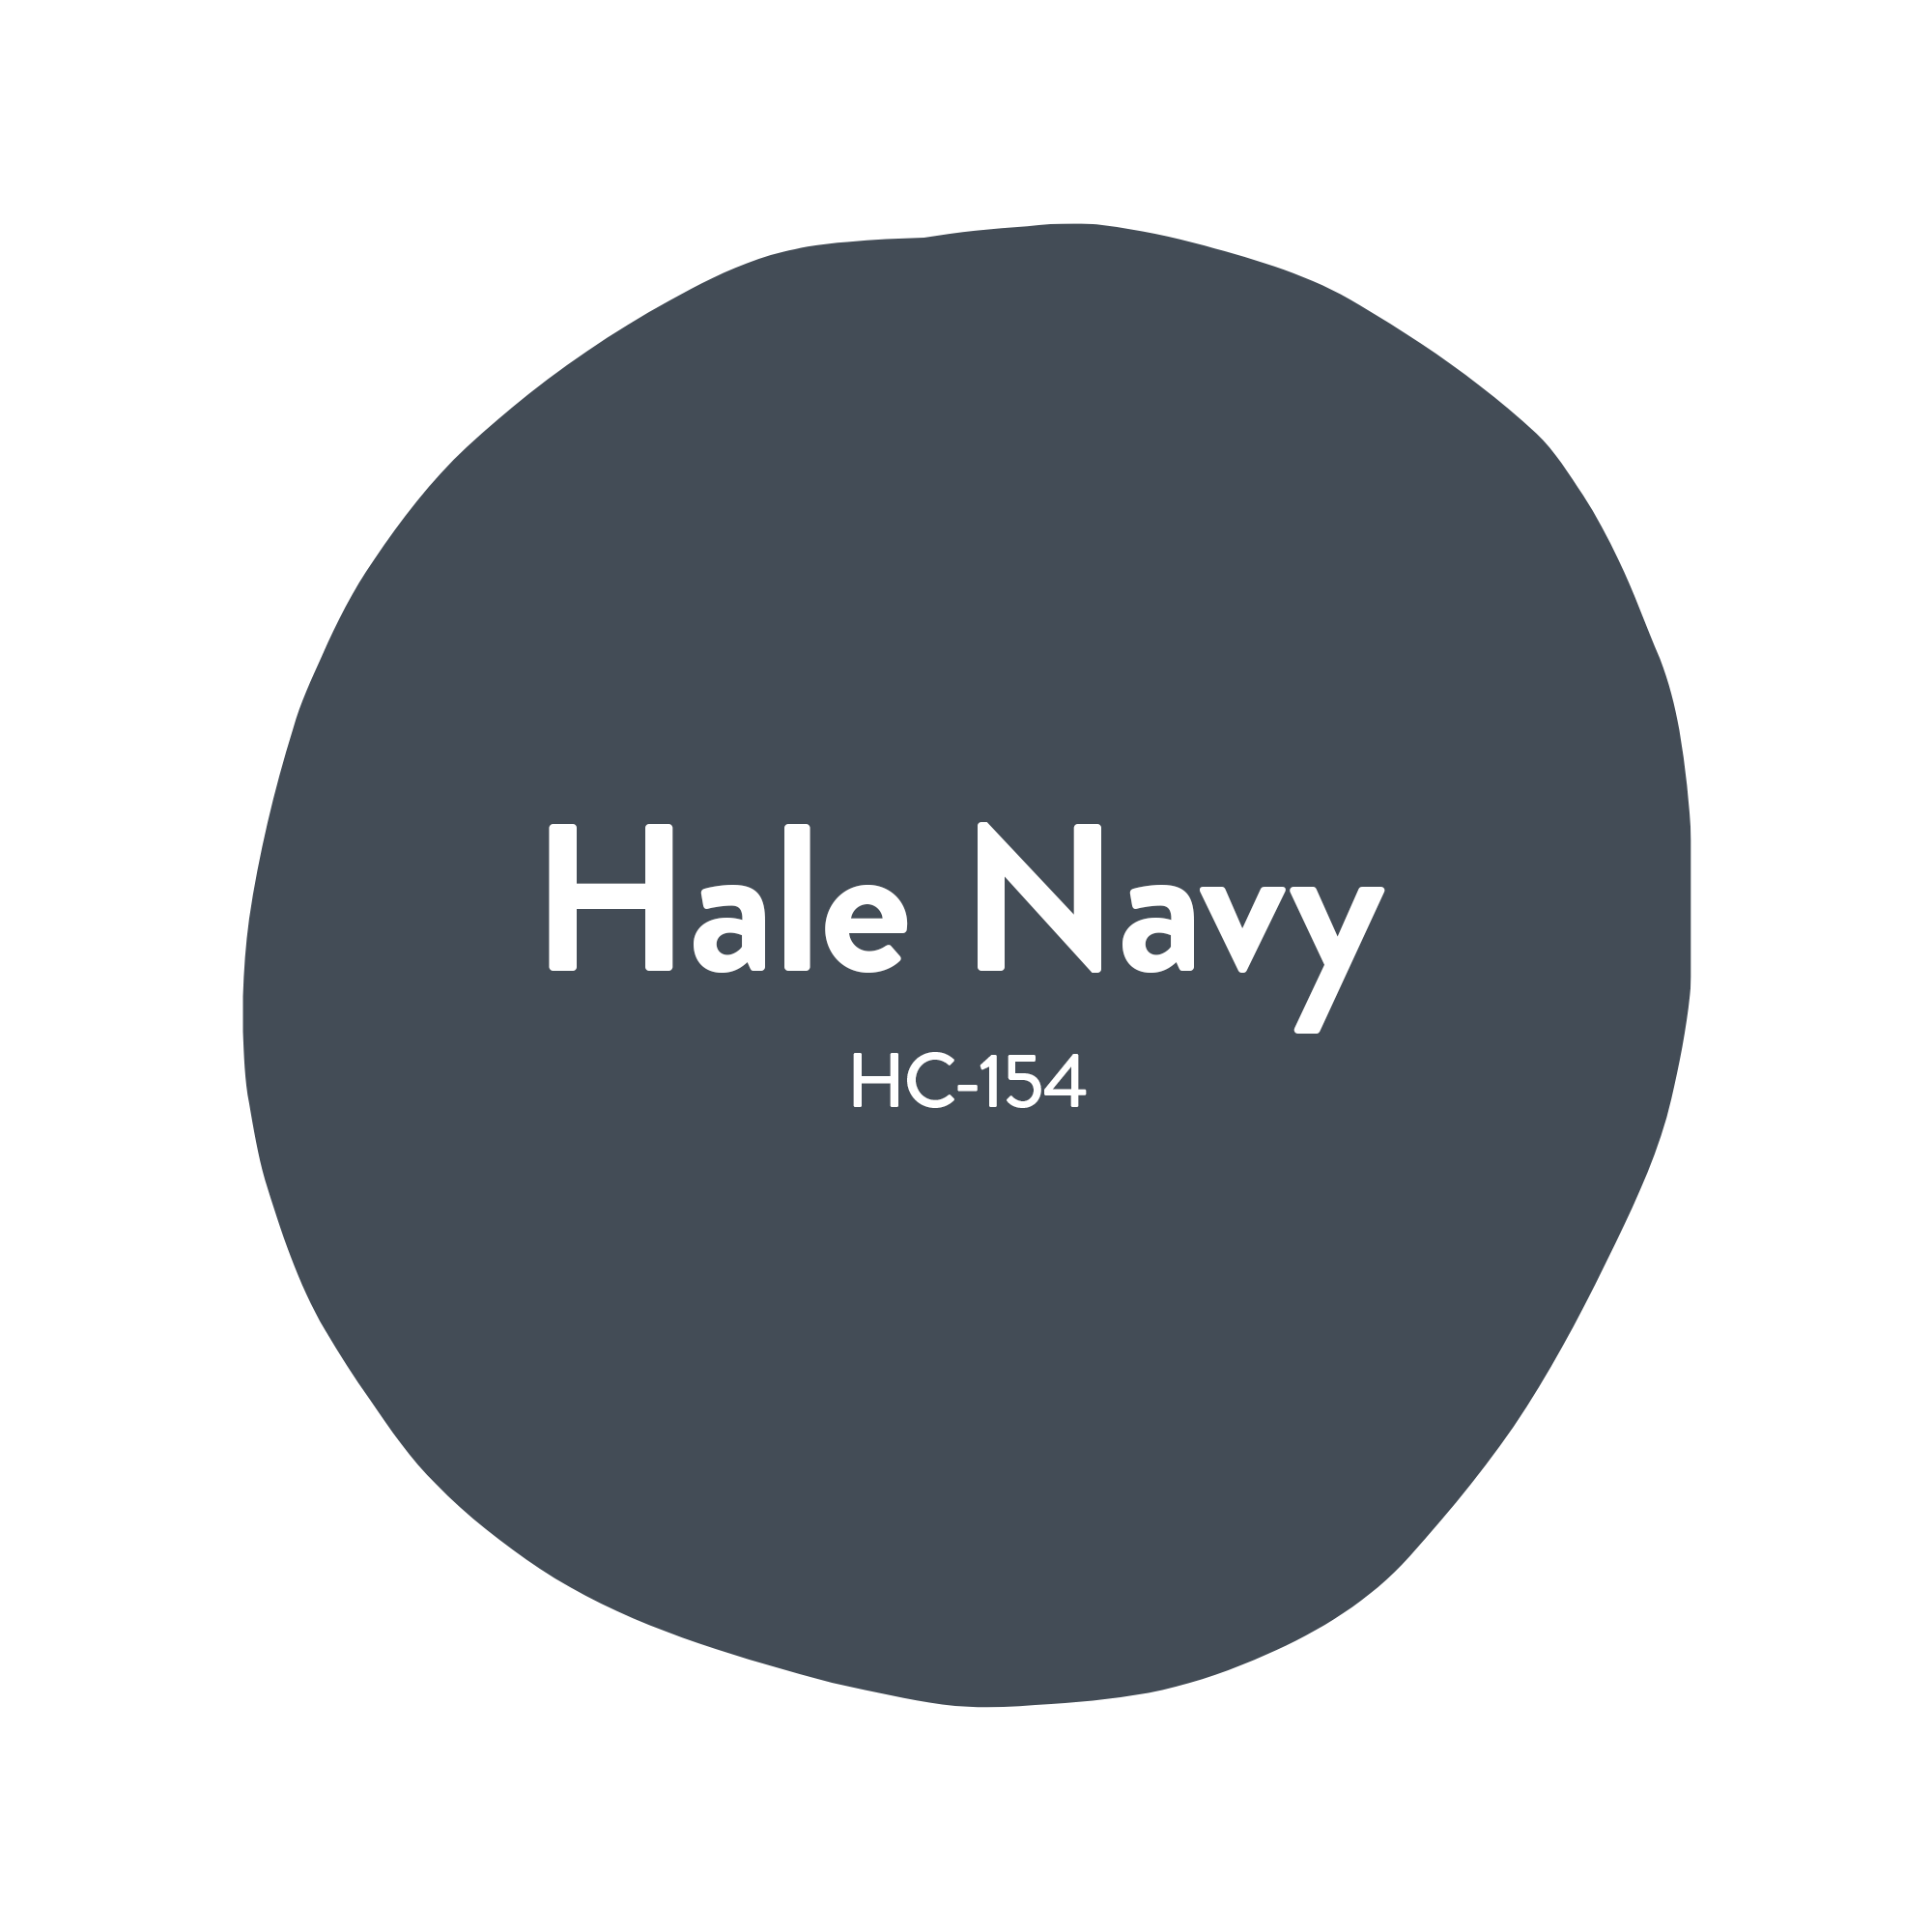 Benjamin Moore's Hale Navy - HC-154 Recommended by Sonja Pound